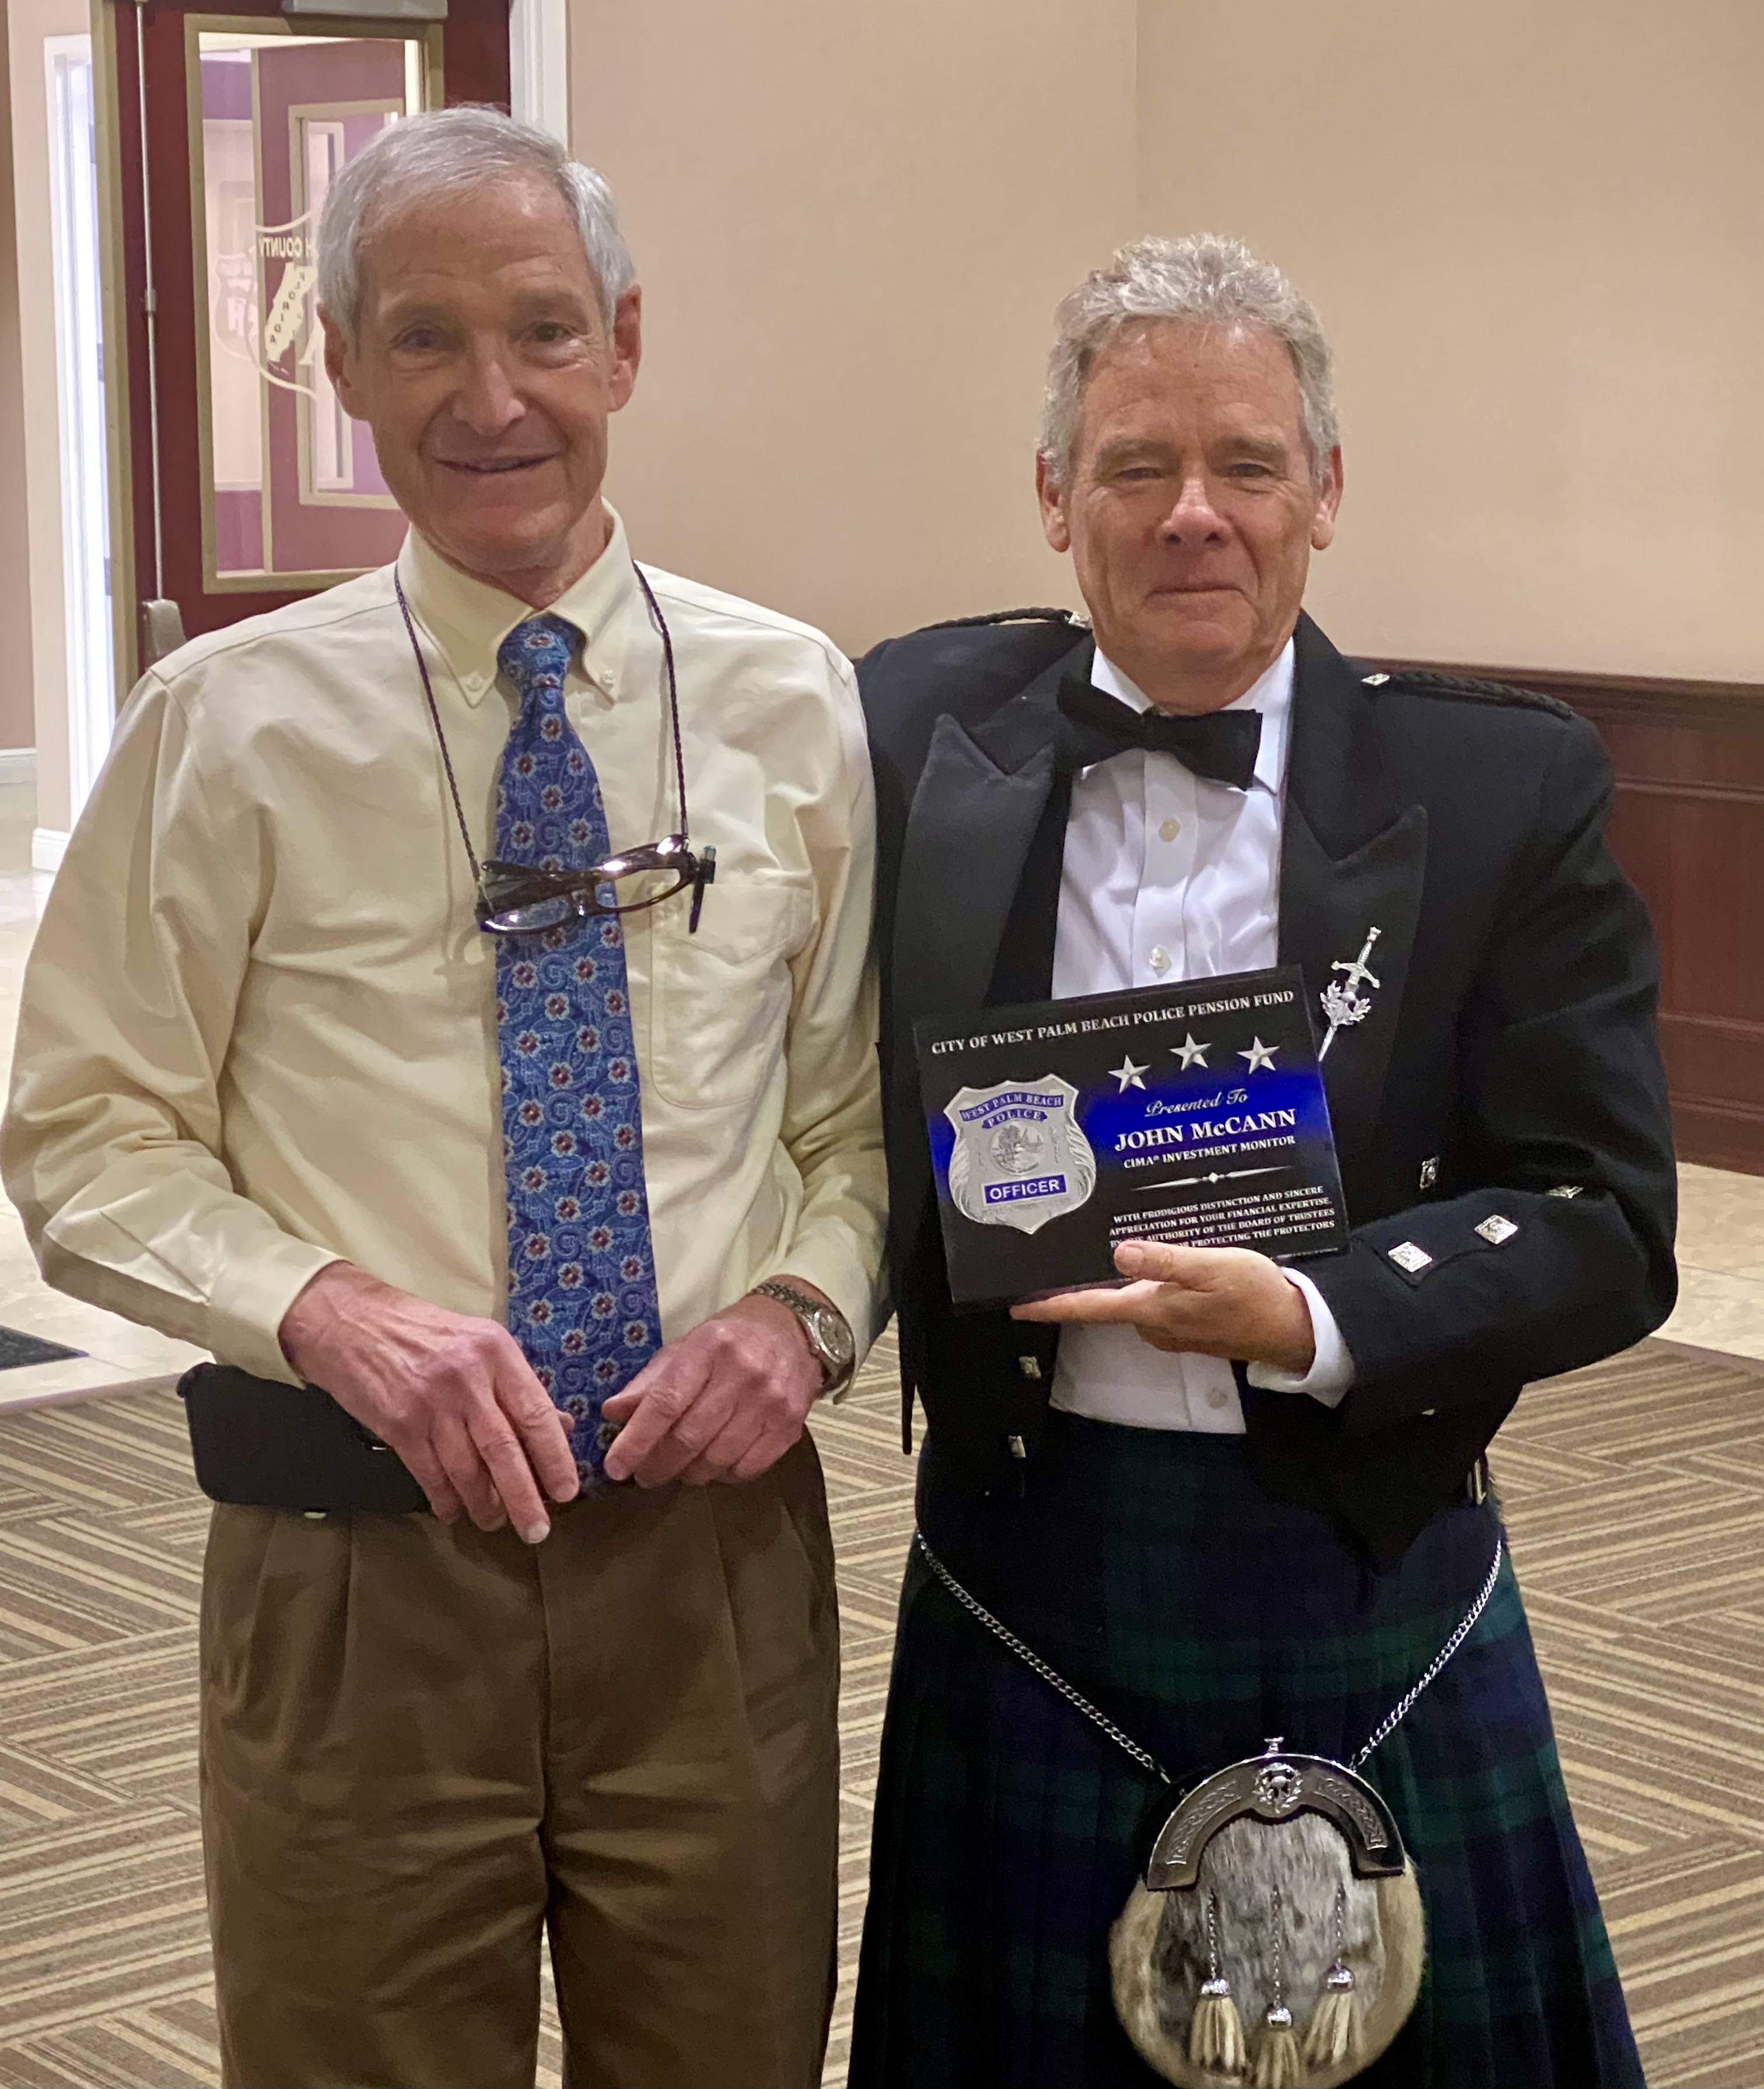 November 12, 2021: On behalf of the Board of Trustees, Chairman Jack Frost (Pictured L) presented John McCann a token of appreciation. John is the Investment Monitor serving since 2009 and is retiring in December. Under Johnâ€™s watch the fund has increased from 174 million to 483 million. Amazing work John and we wish him many years of happiness in the next chapter of his life.